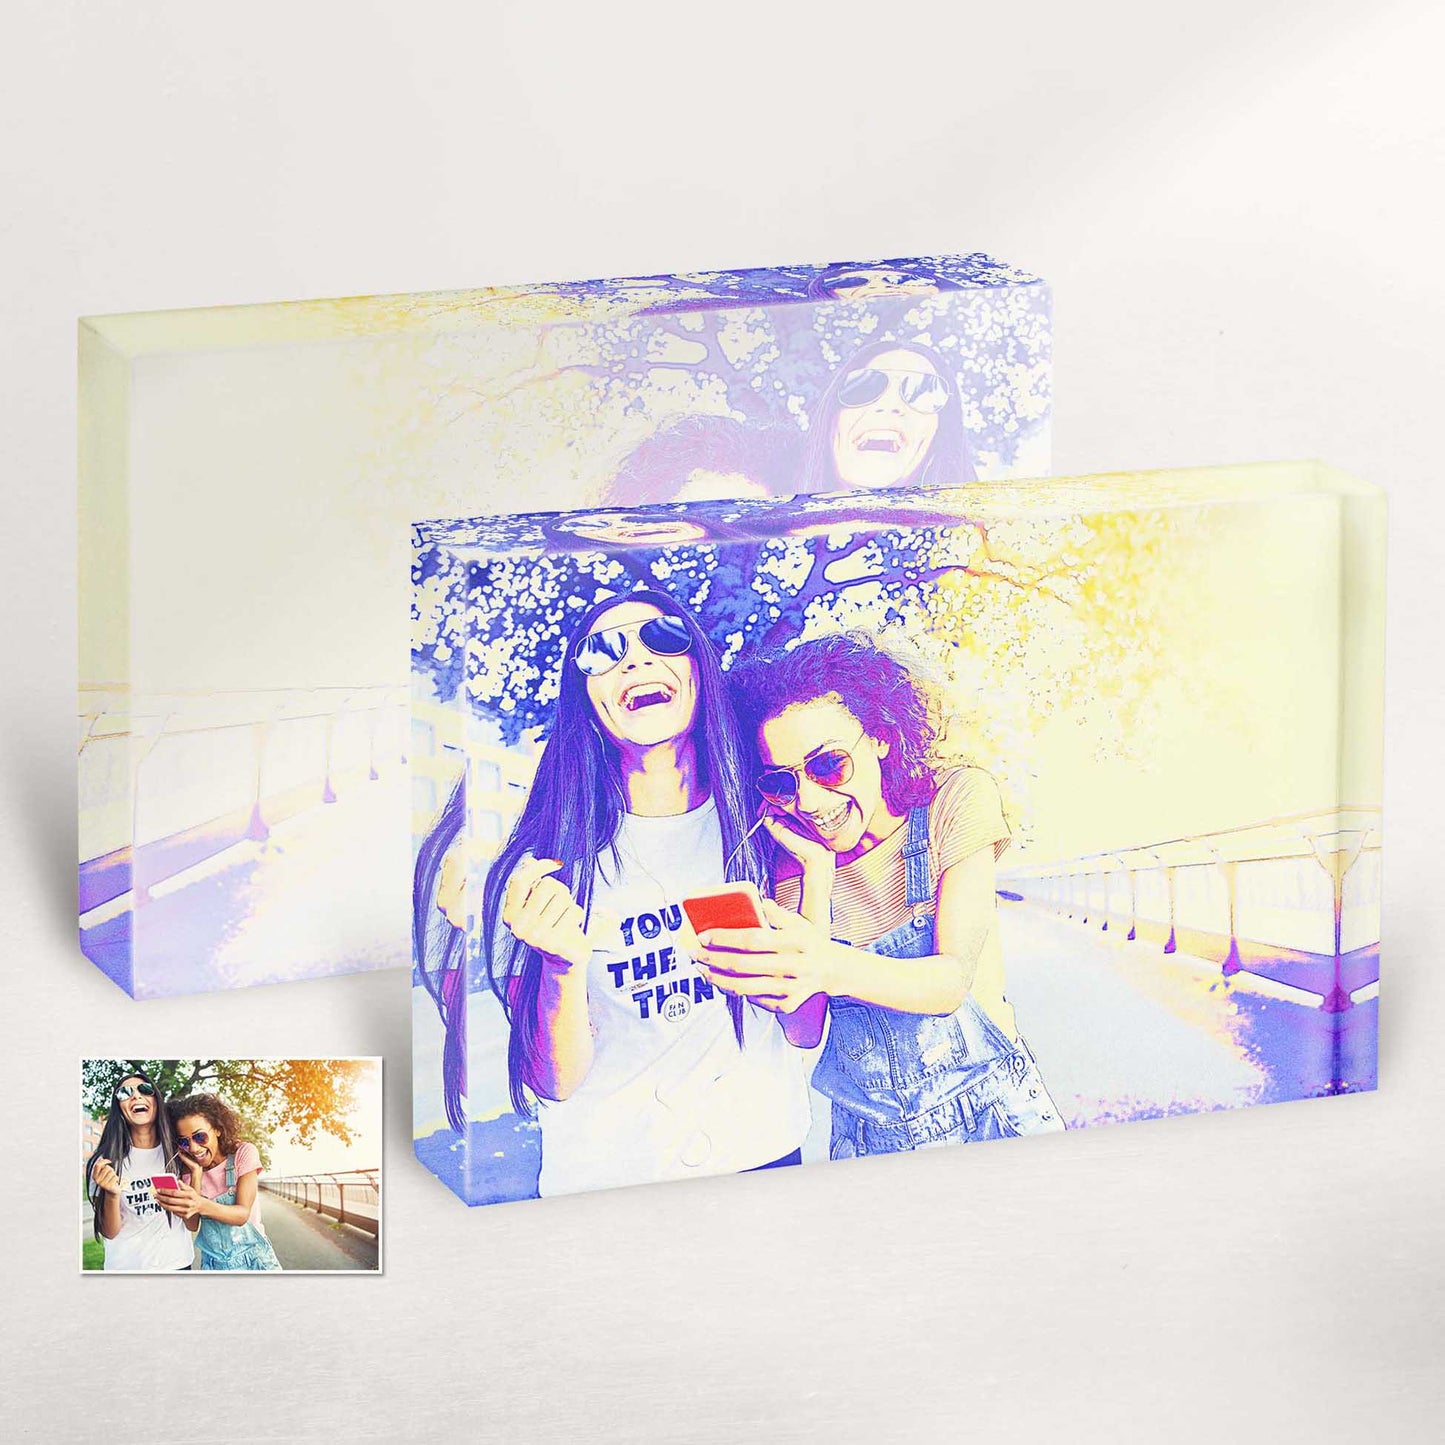 Experience the beauty of personalised art with this Blue and Purple Posterizer Acrylic Block Photo. The striking combination of blue and purple shades creates a visually captivating and one-of-a-kind artwork, perfect for home decor or as a thoughtful gift